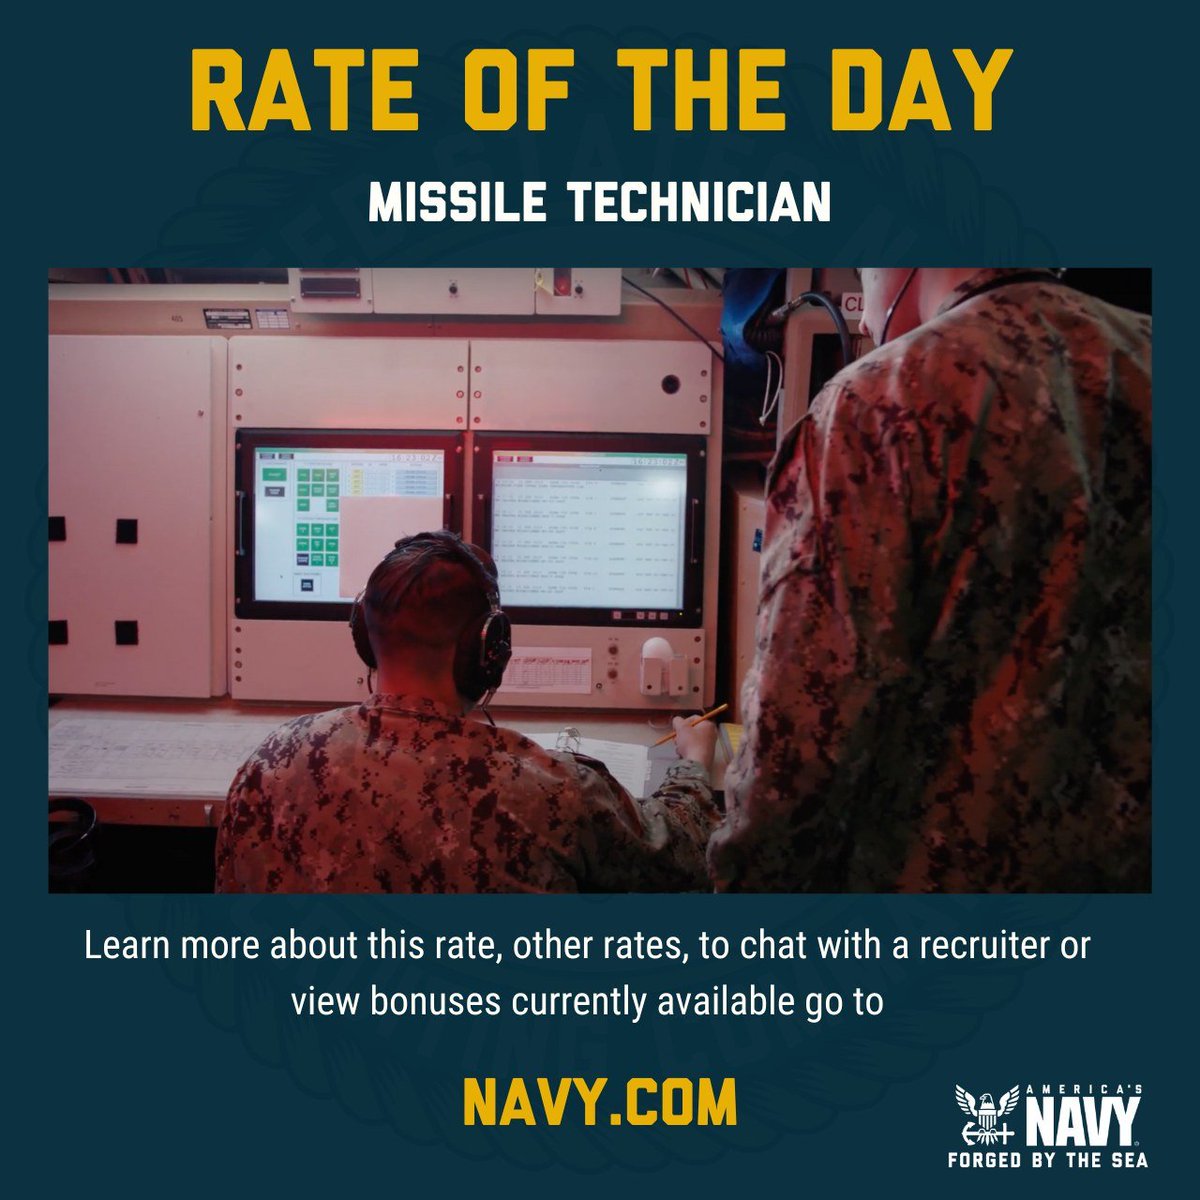 Rate of the Day: Missile Technician
You’ll assemble, maintain and repair nuclear-capable ballistic missiles on submarines around the world.

Video: youtu.be/NzXnGSWl3CM

Learn: navy.com/careers/missil…

#USNavy #Recruiting #Forgedbythesea